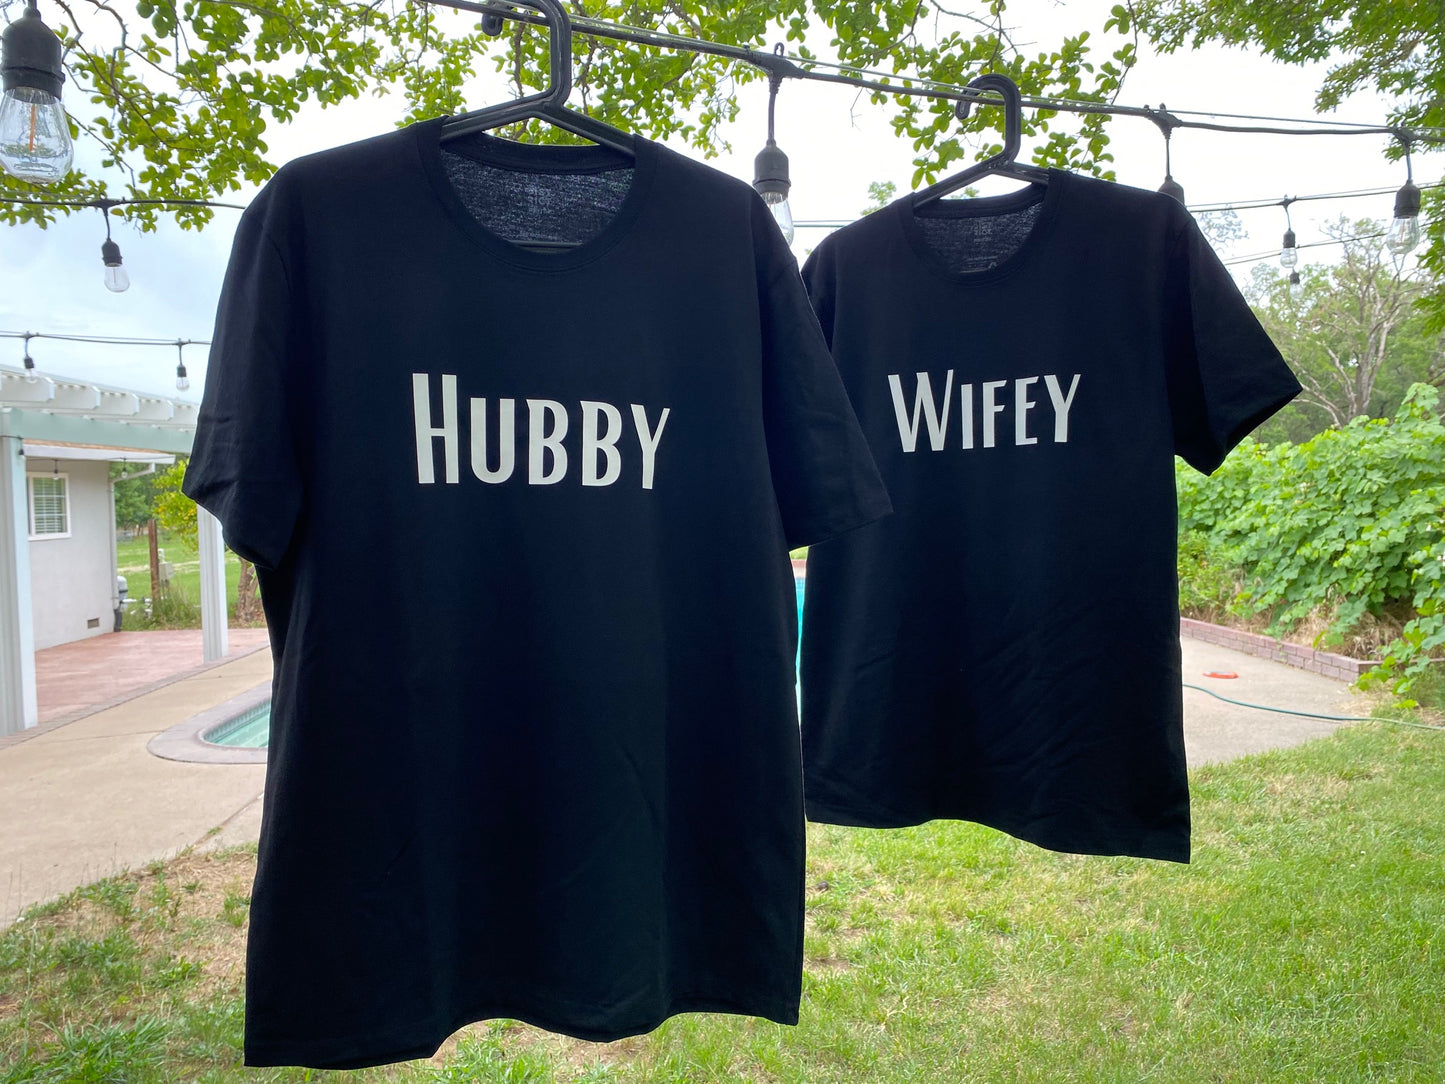 Hubby and Wifey Black Matching Sustainably Made T-Shirts